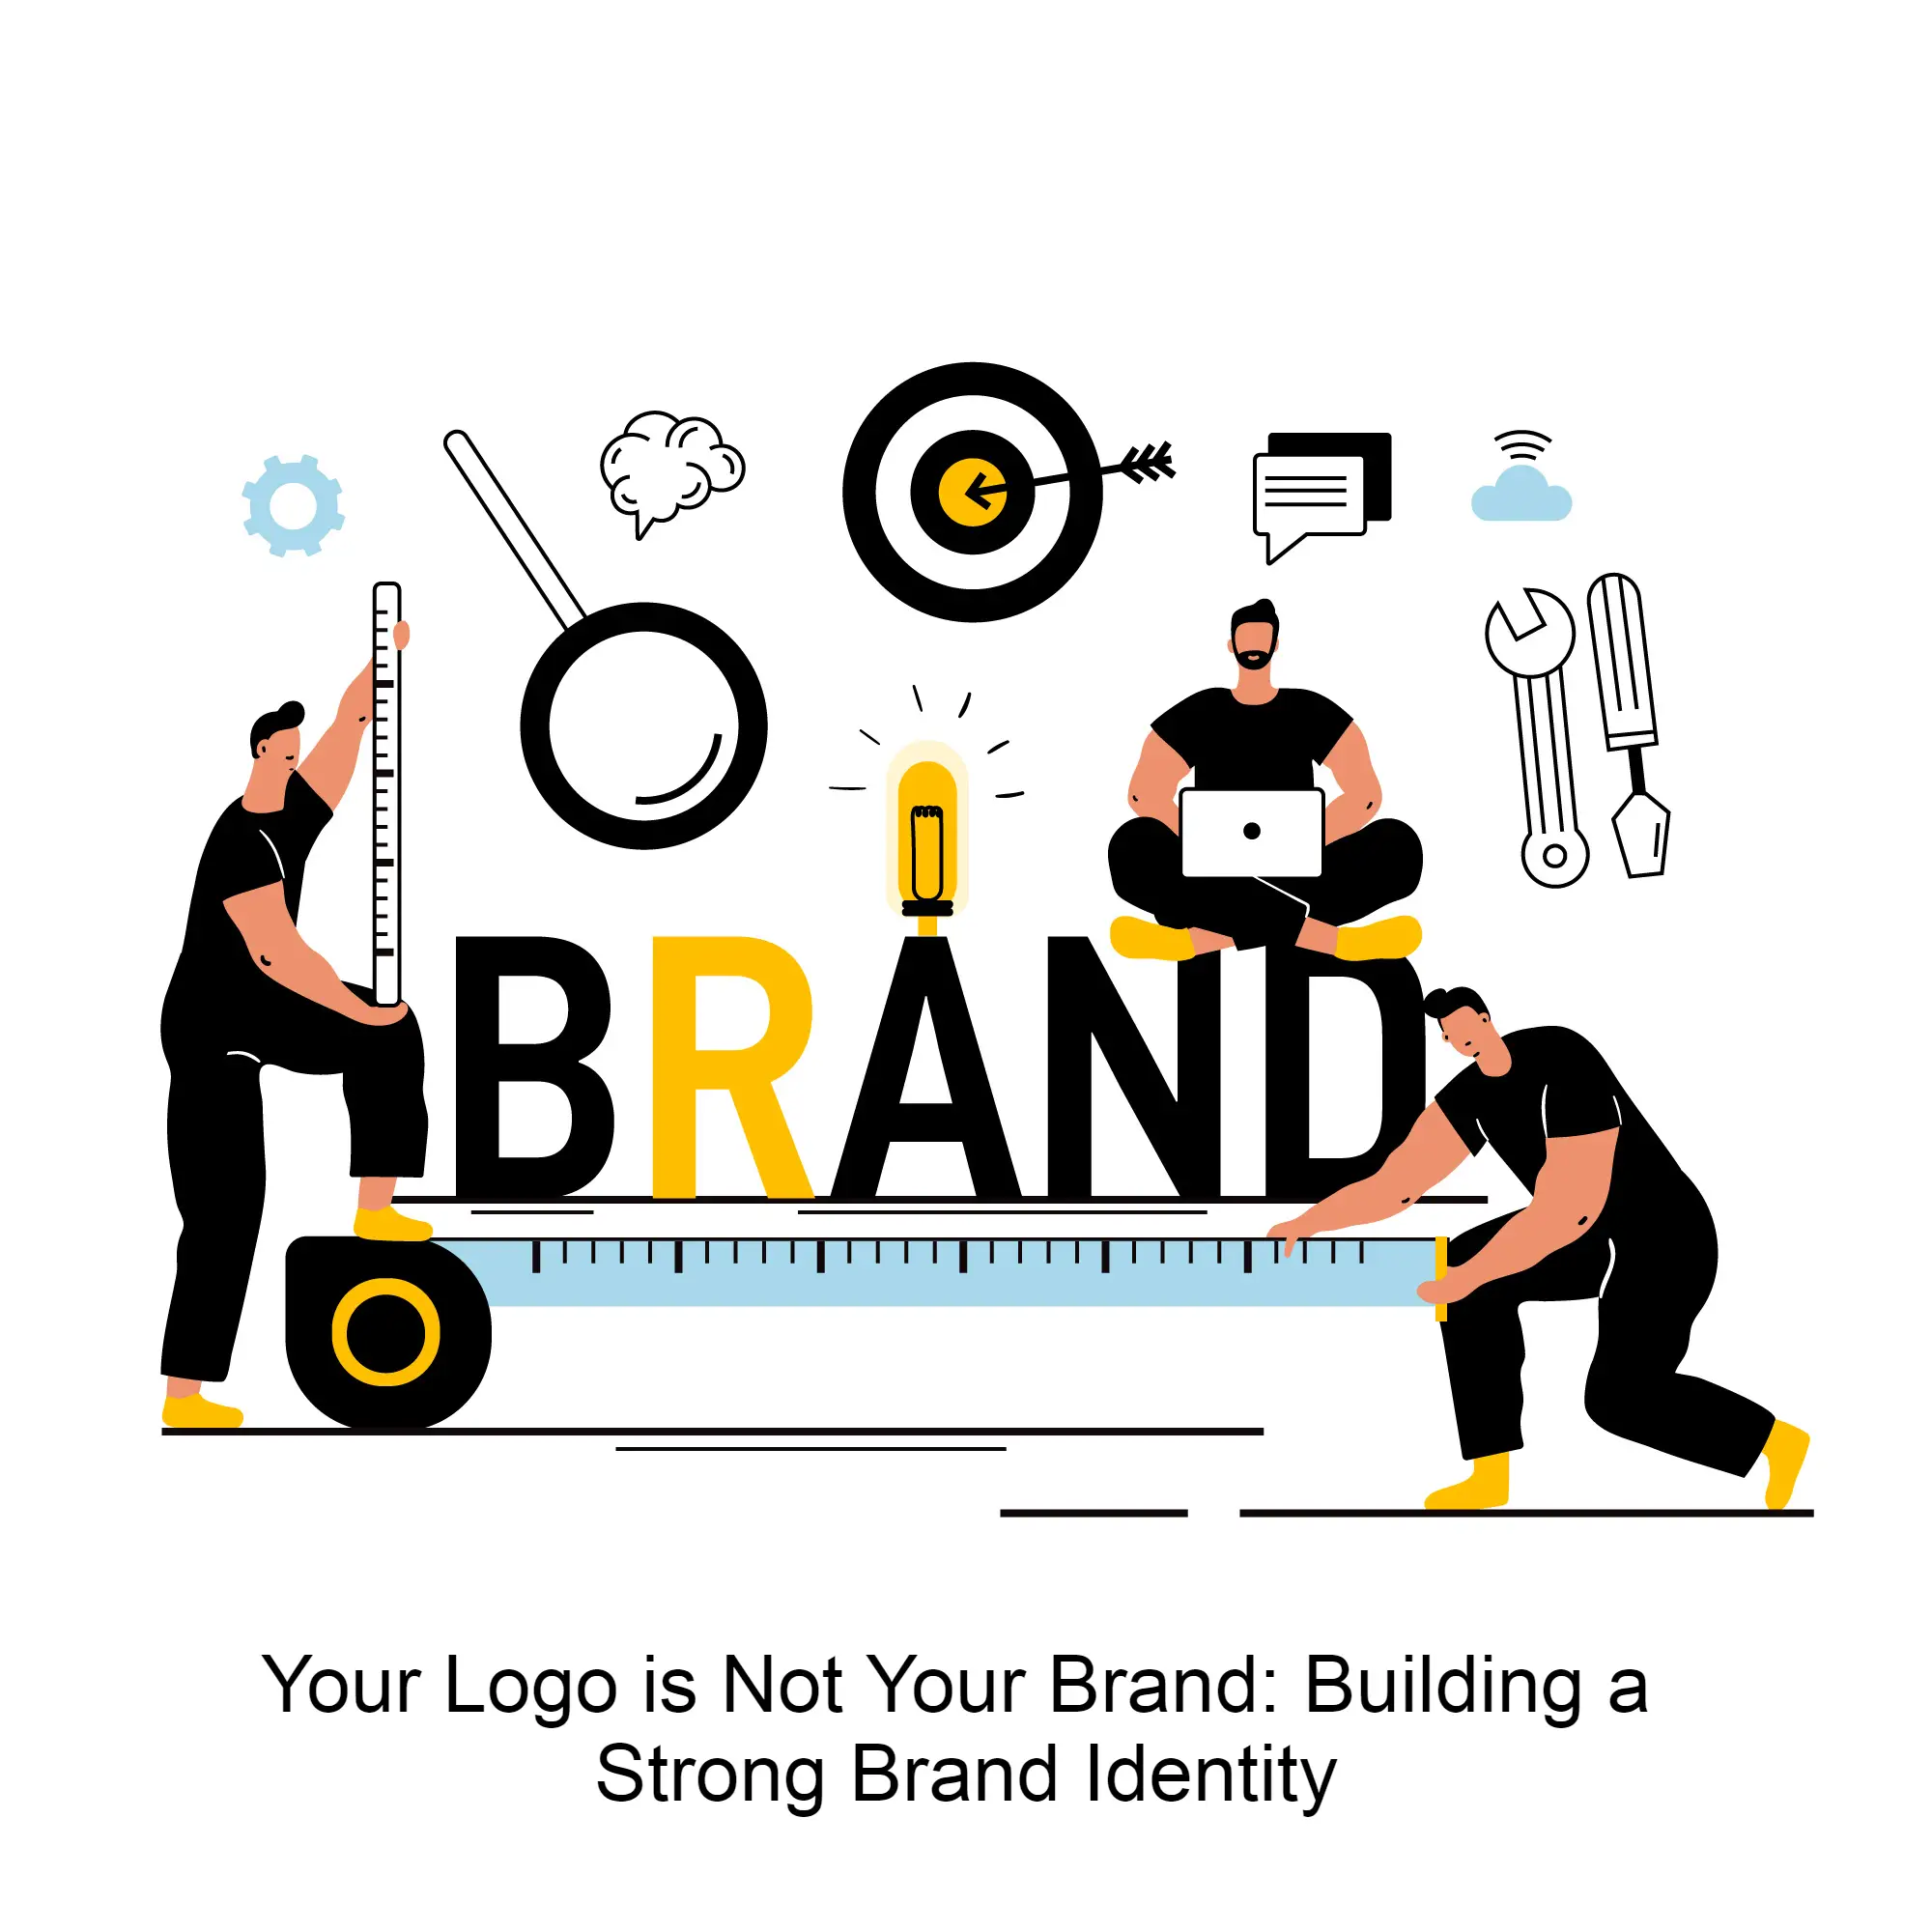 Your Logo is Not Your Brand: Building a Strong Brand Identity